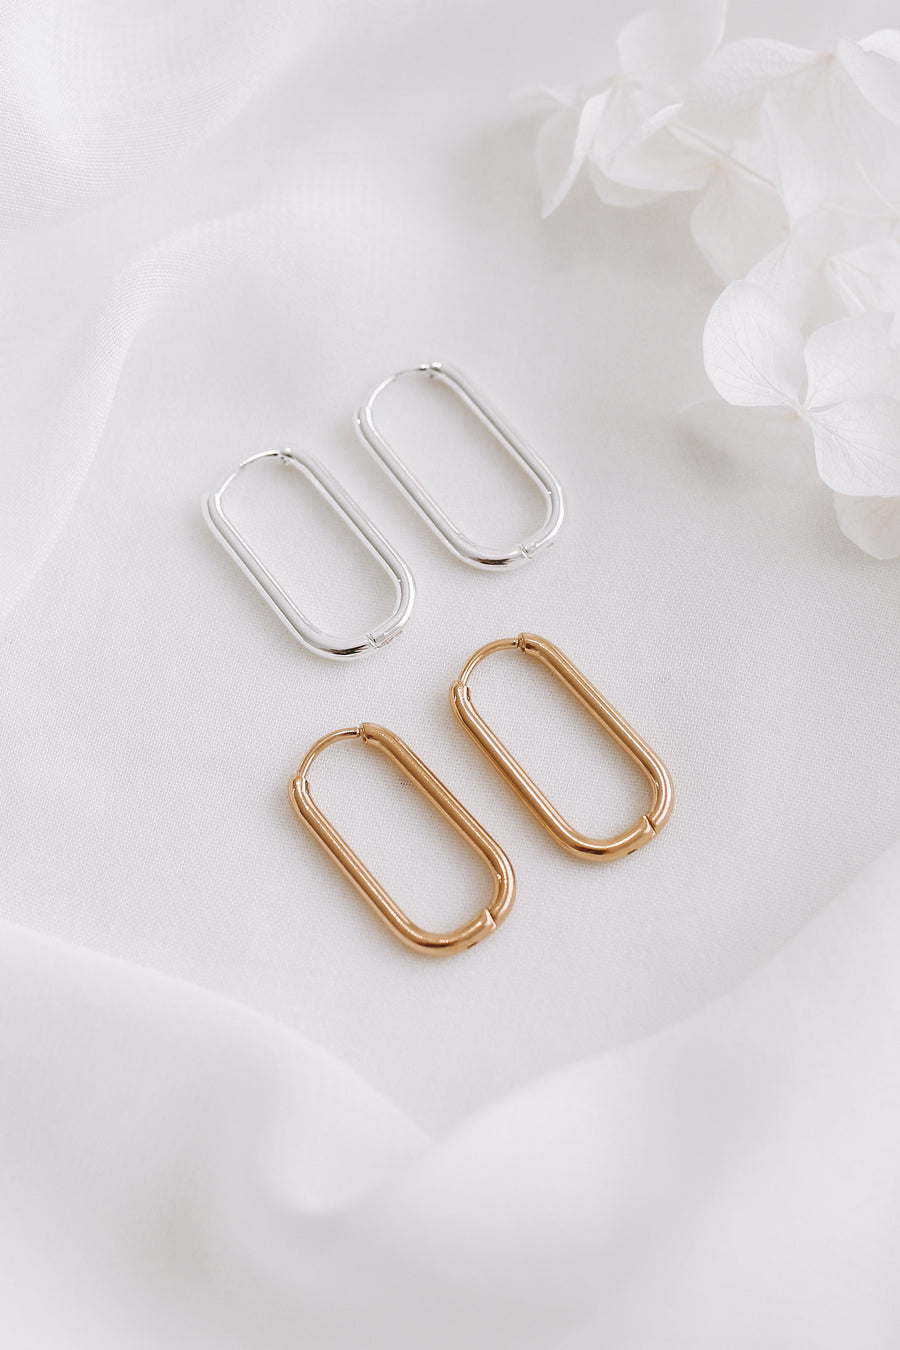 Tallulah - Gold or Silver Stainless Steel Hoops